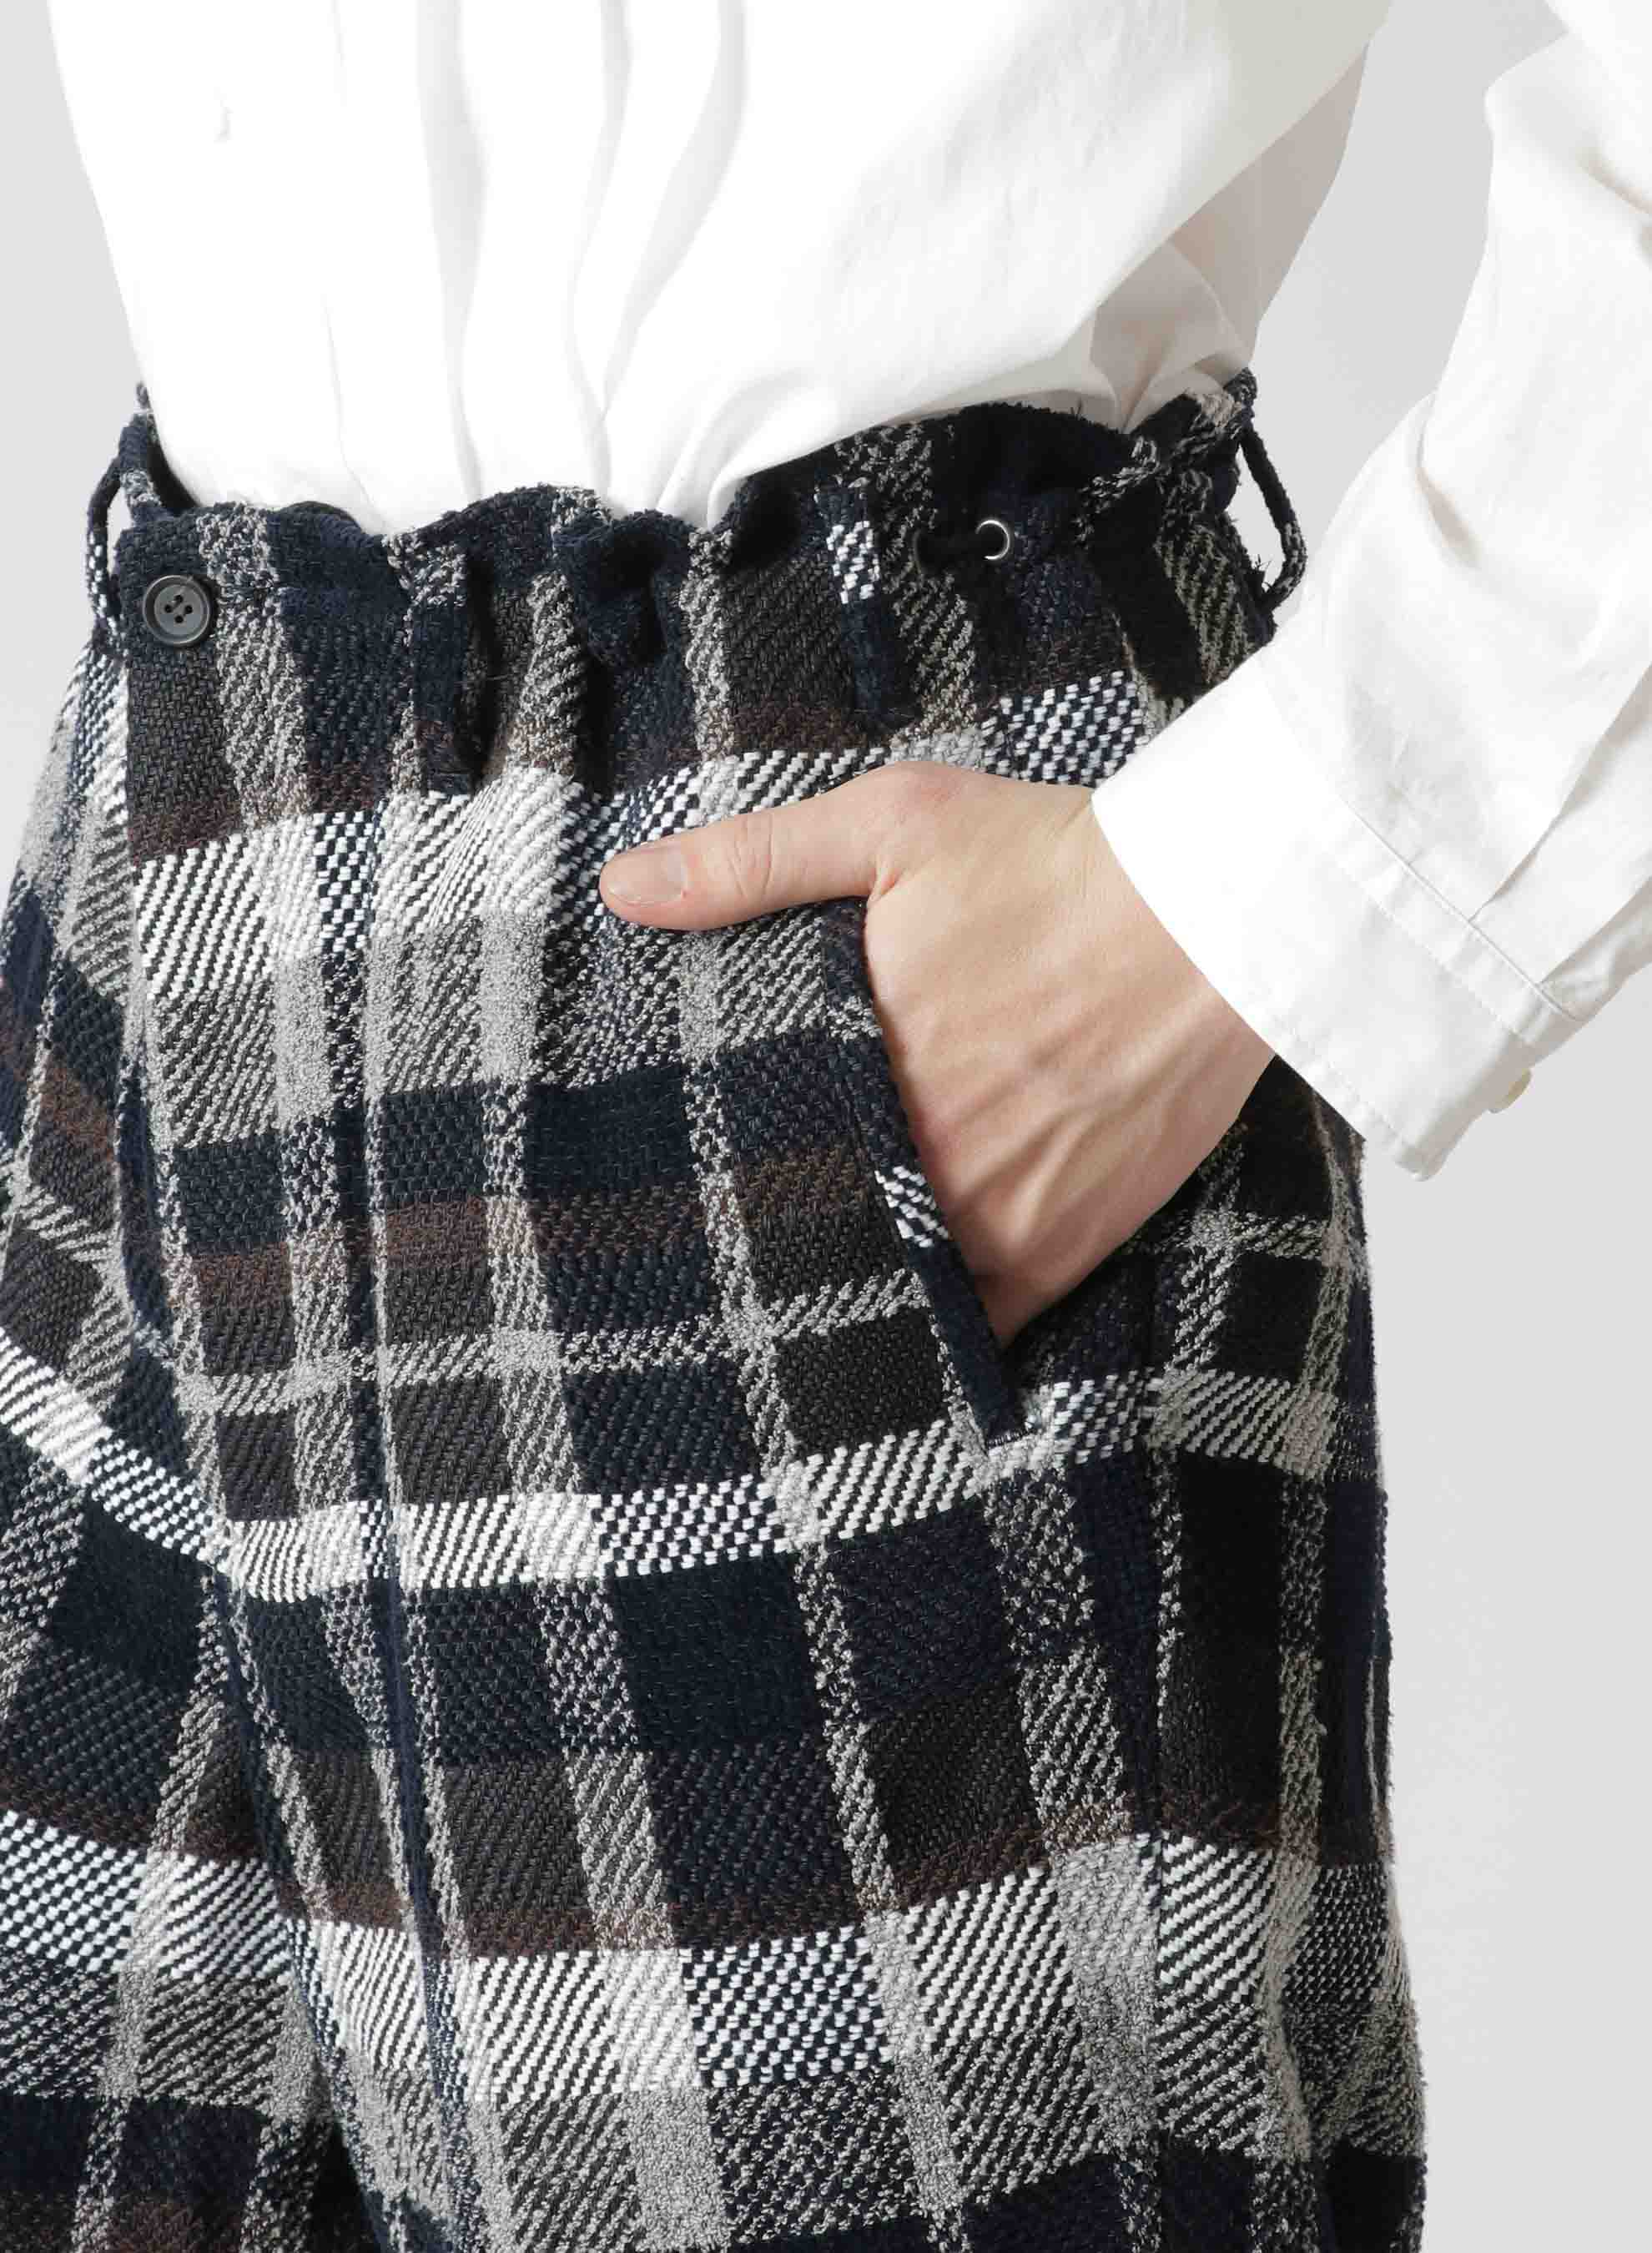 COTTON/PAPER CHECK TWEED PLAID SIDE STRING PANTS